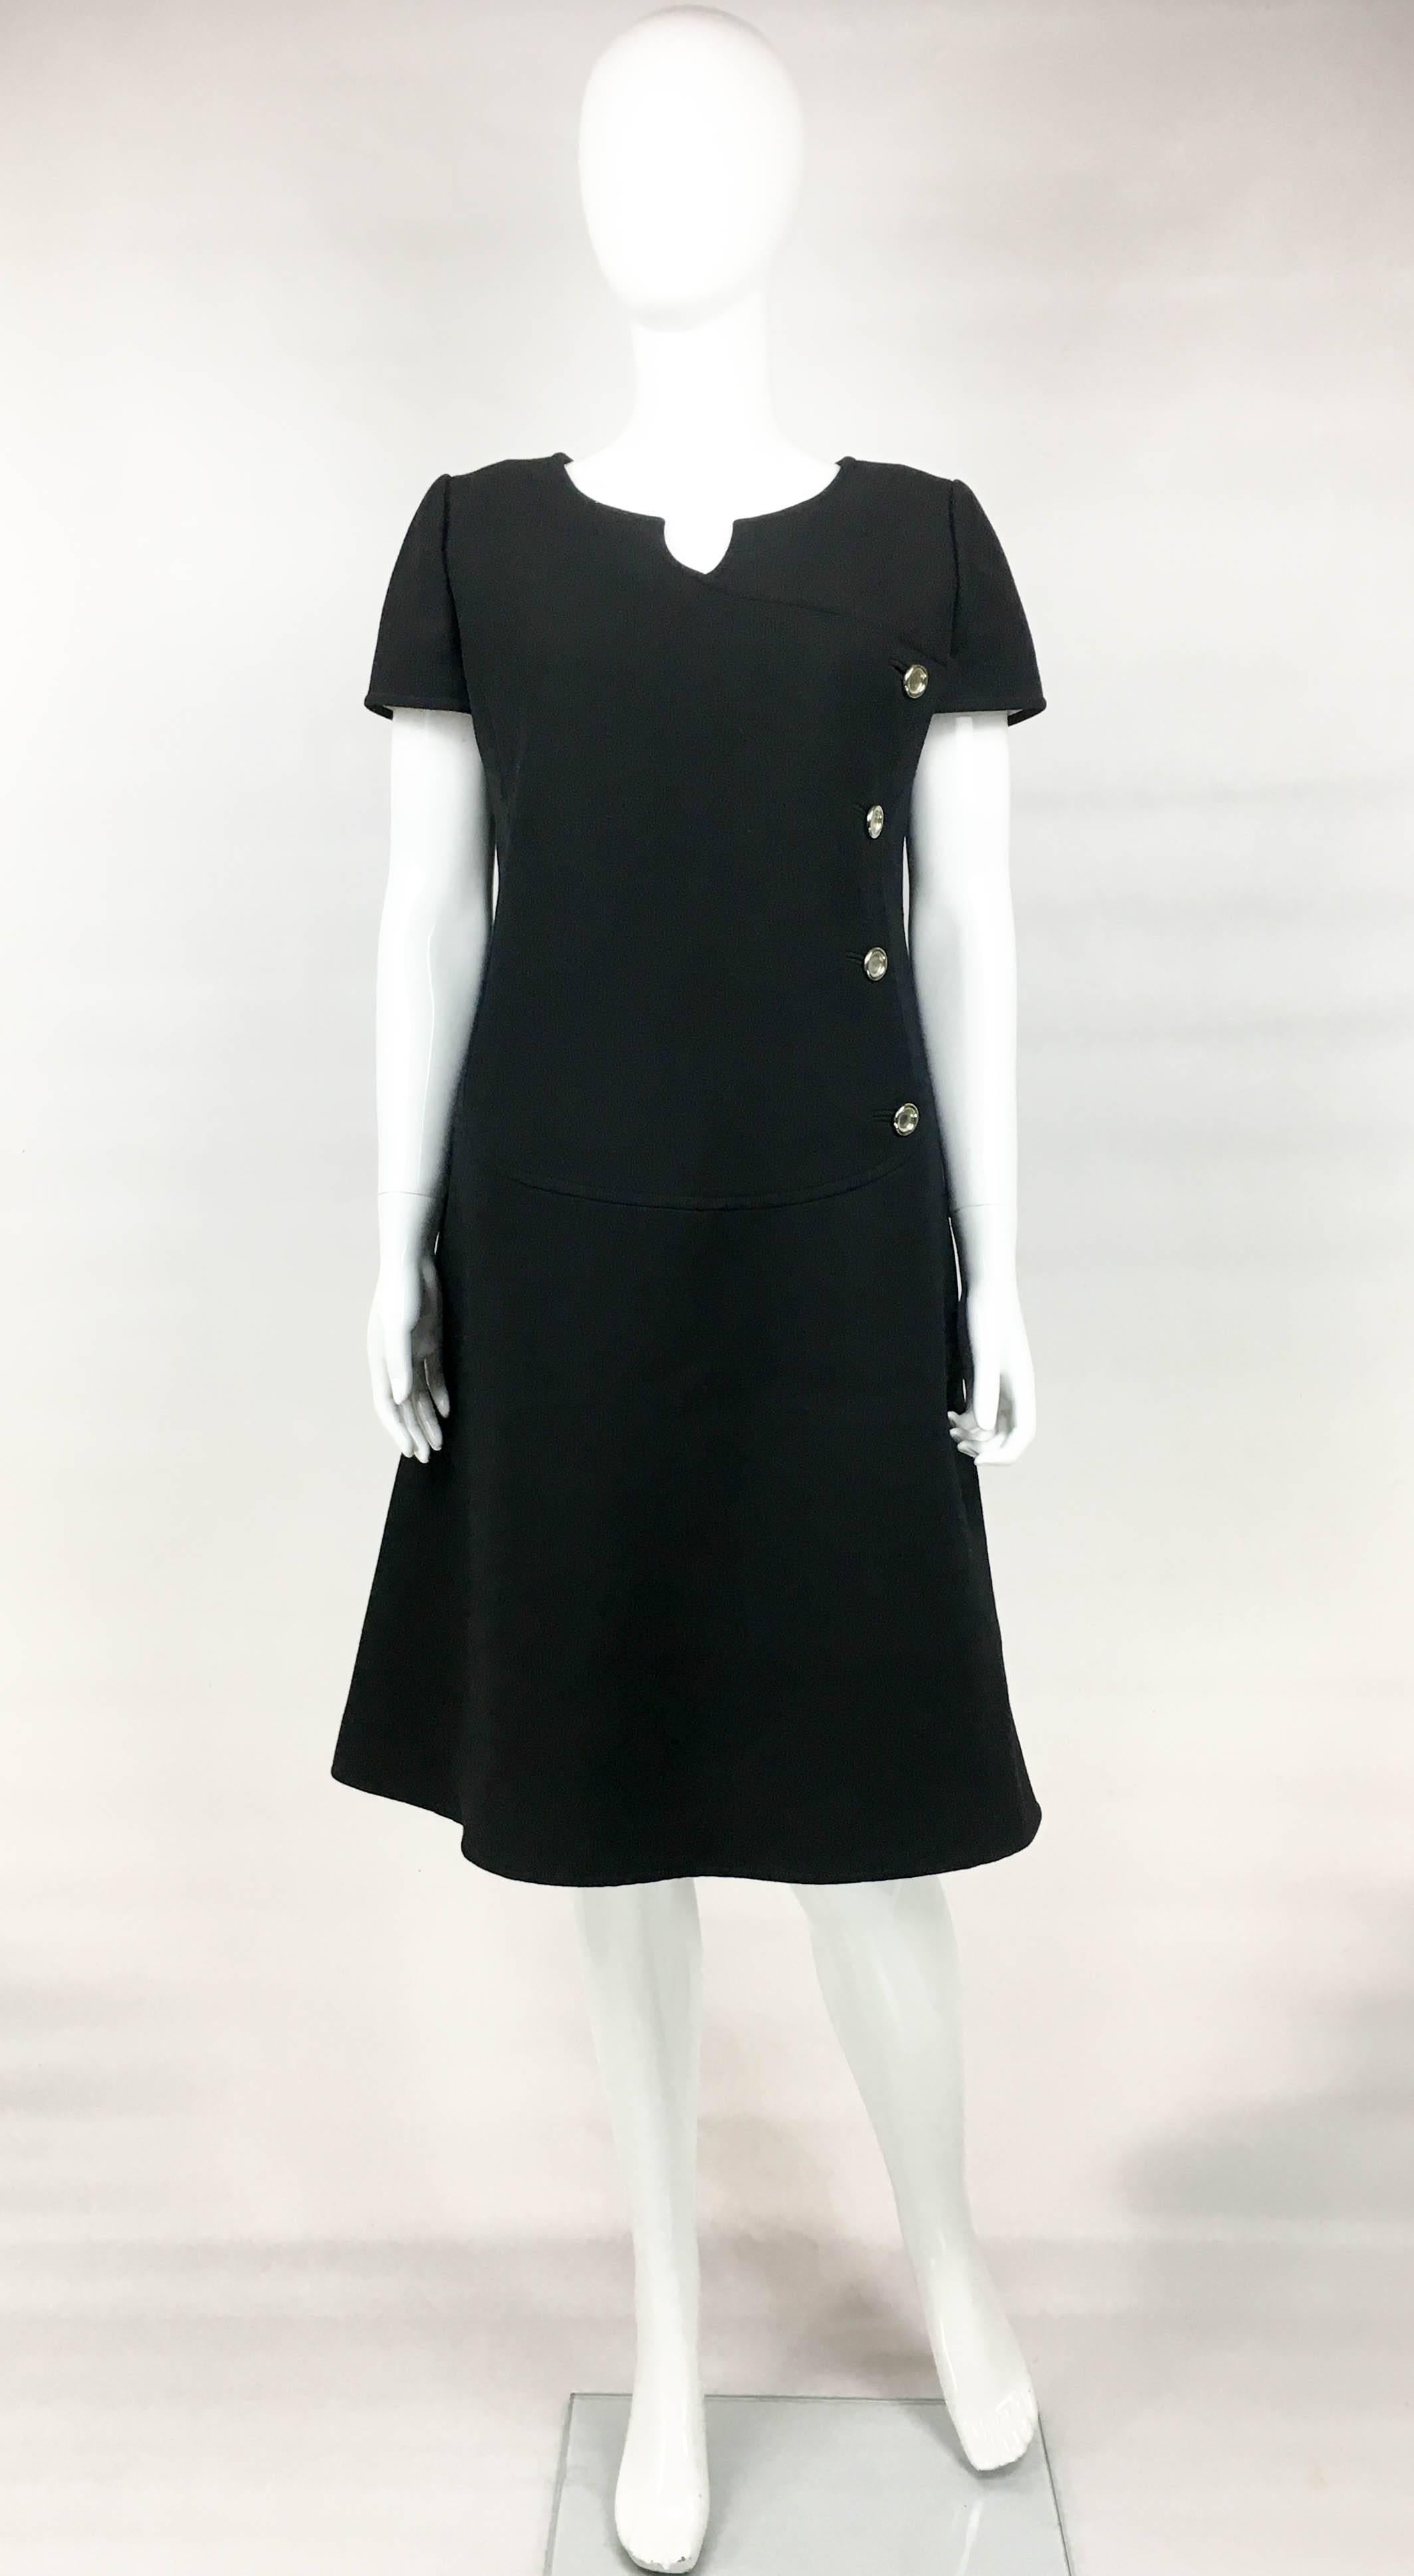 Vintage Courreges Black Wool Dress. This dress by Courreges dates back from the late 1960’s. Made in black wool, it has the iconic 60’s mod shape. It has round metal buttons fastening down one side of the bodice. Hidden zipper on the back. Labelled